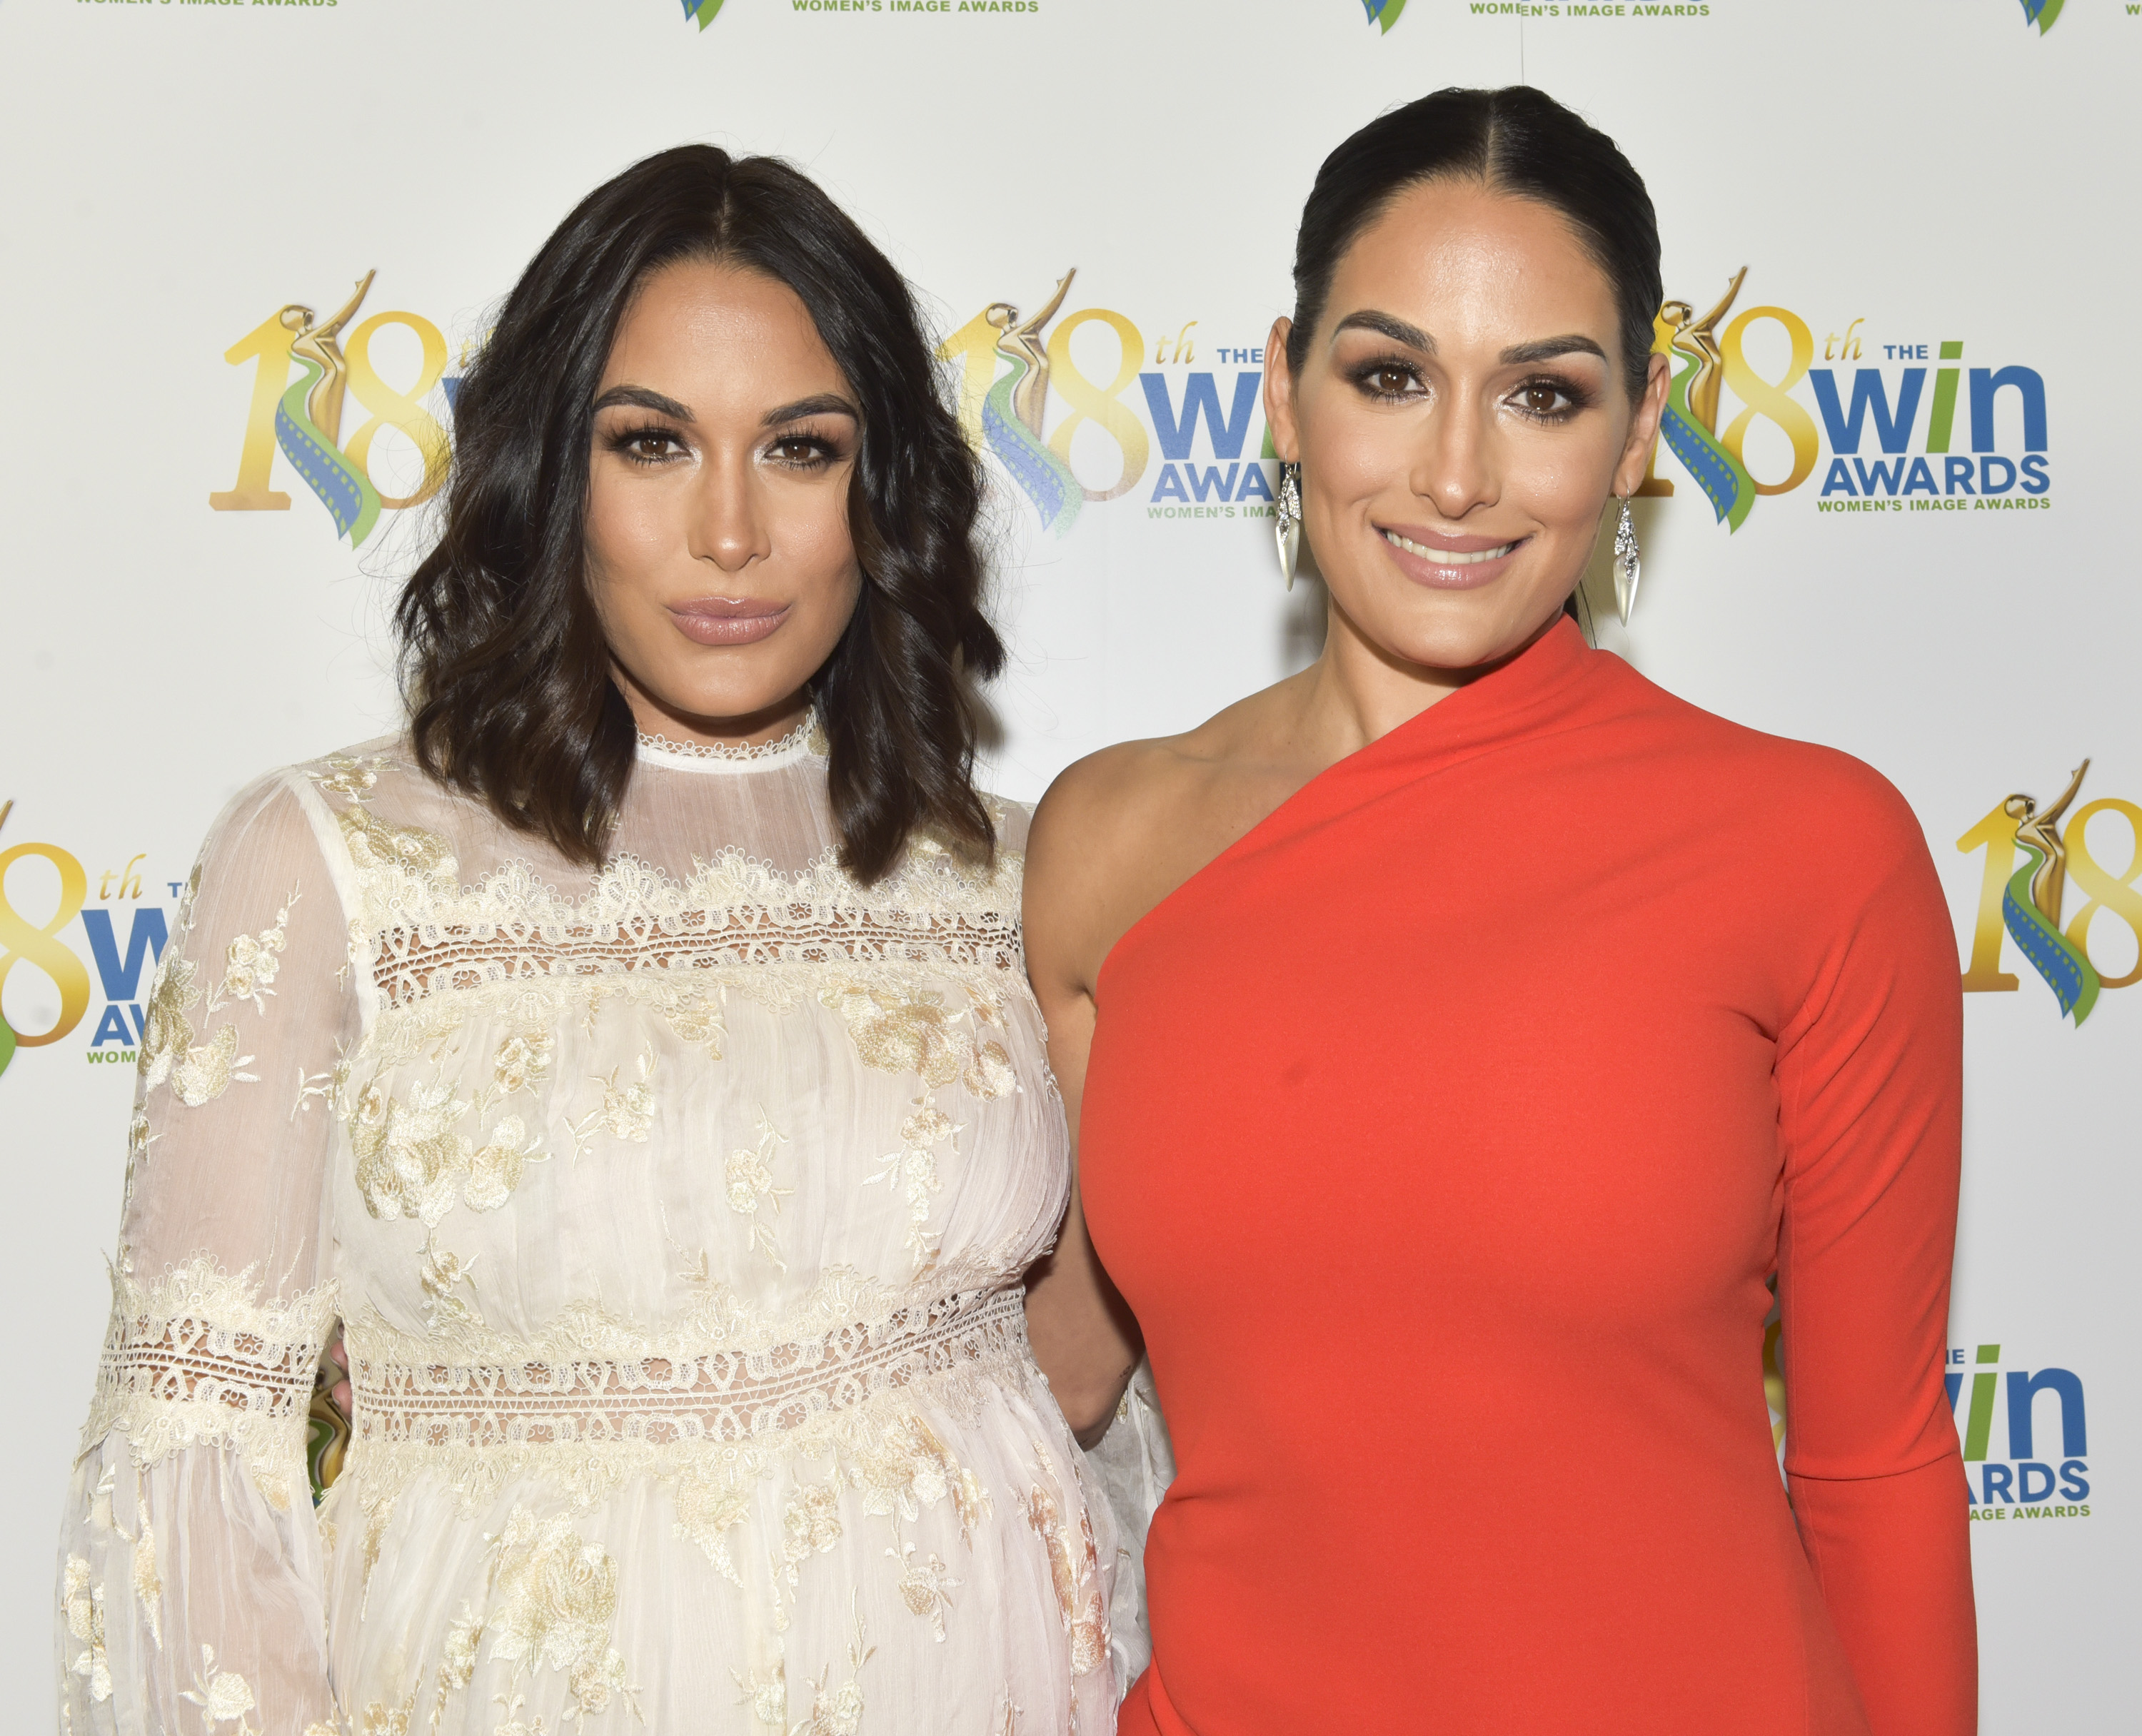 The Bella Twins Image Awards #3